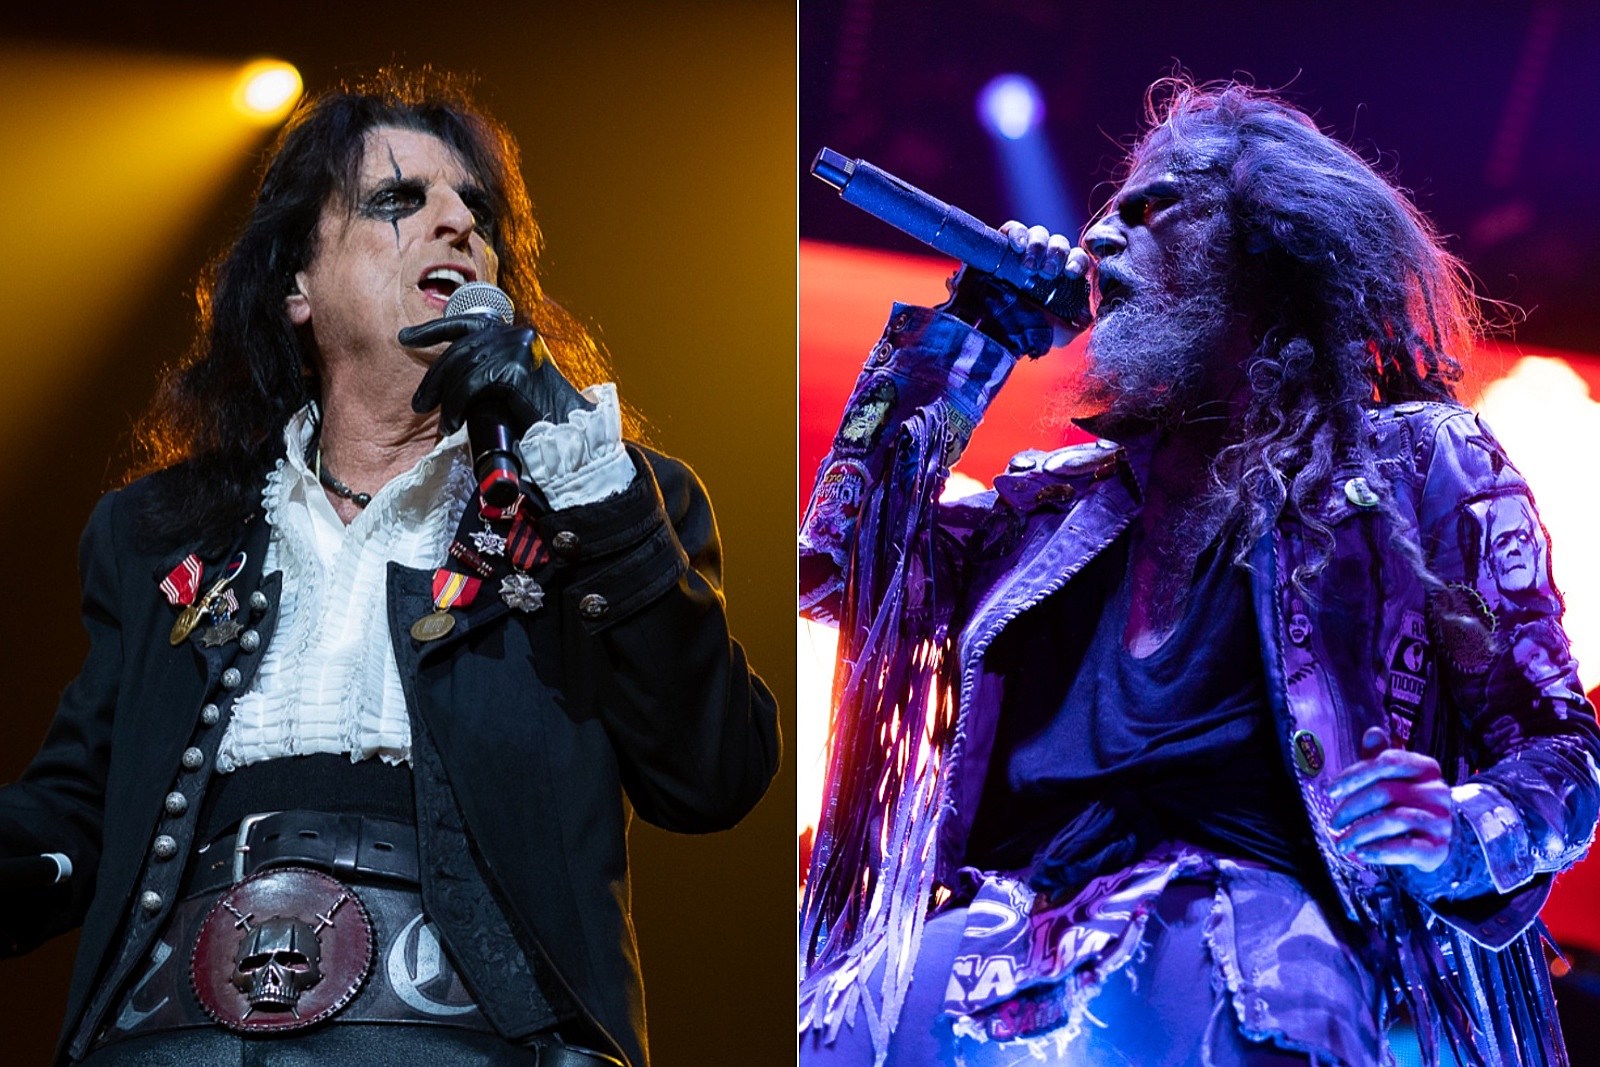 Alice Cooper and Rob Zombie Bring the Heat at Tour Kickoff: Review and Photos